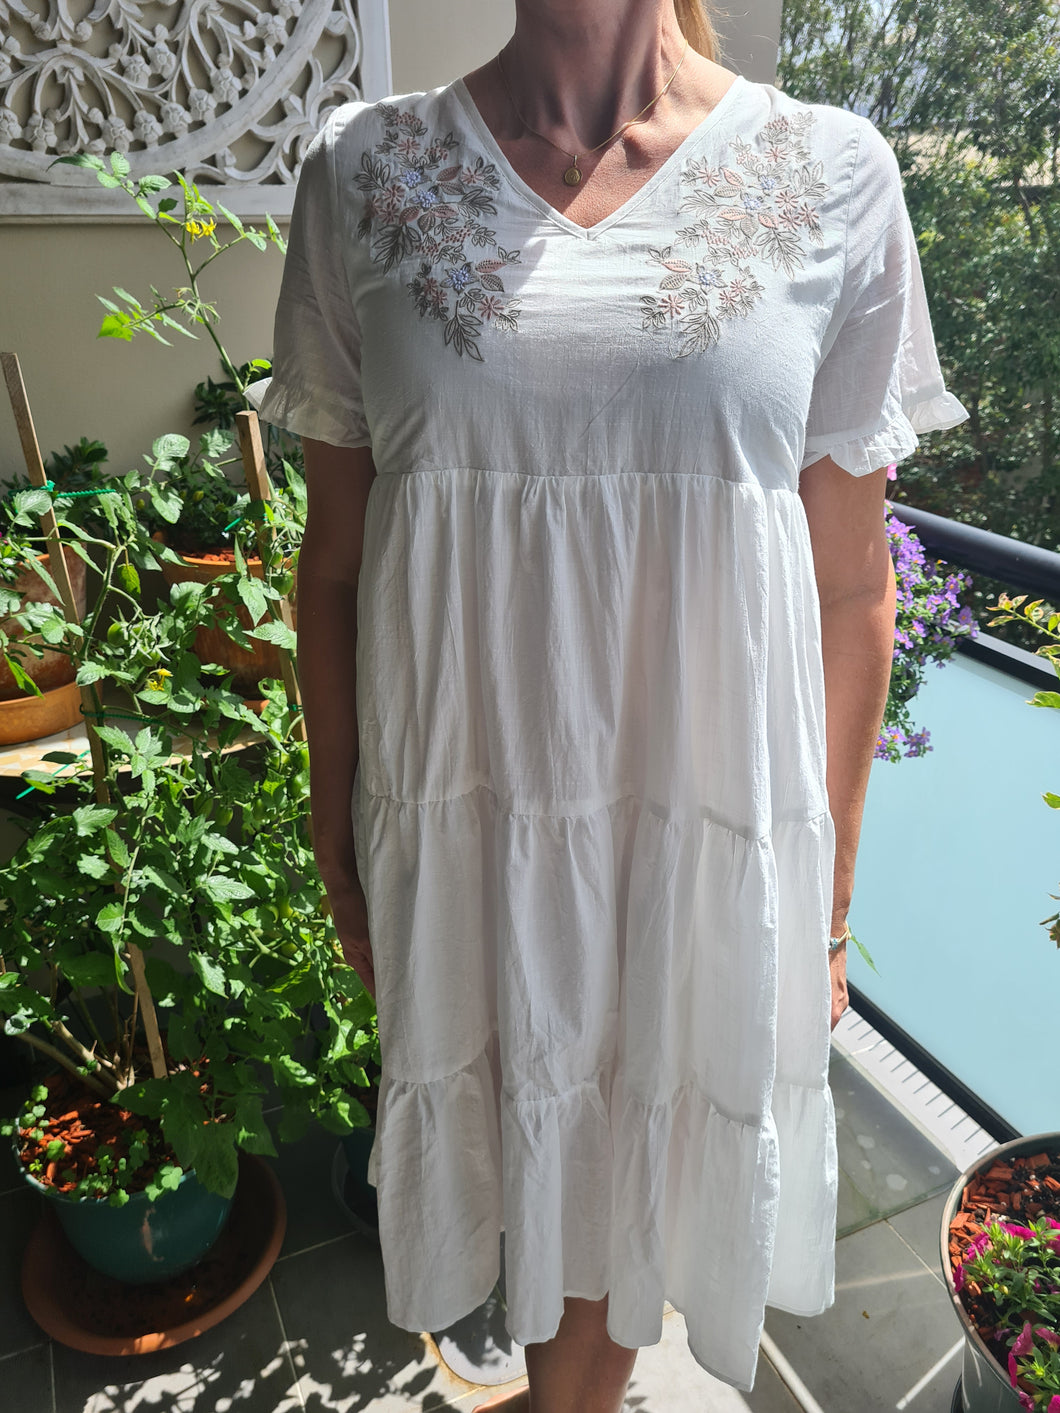 Embroidered White Simple Summer Dress